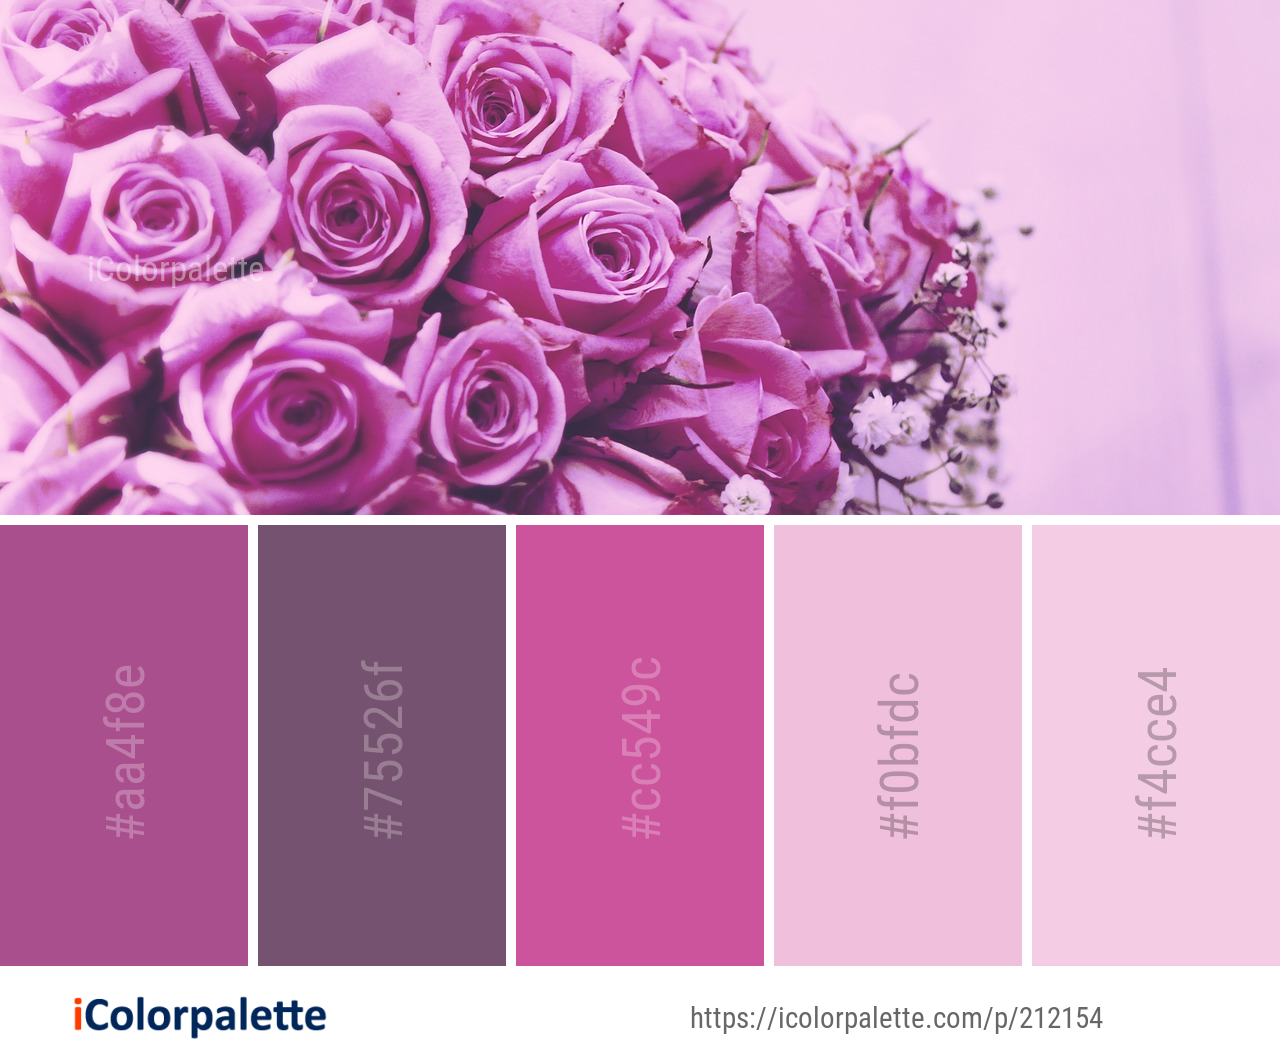 Color Palette Ideas from Flower Pink Rose Image | iColorpalette